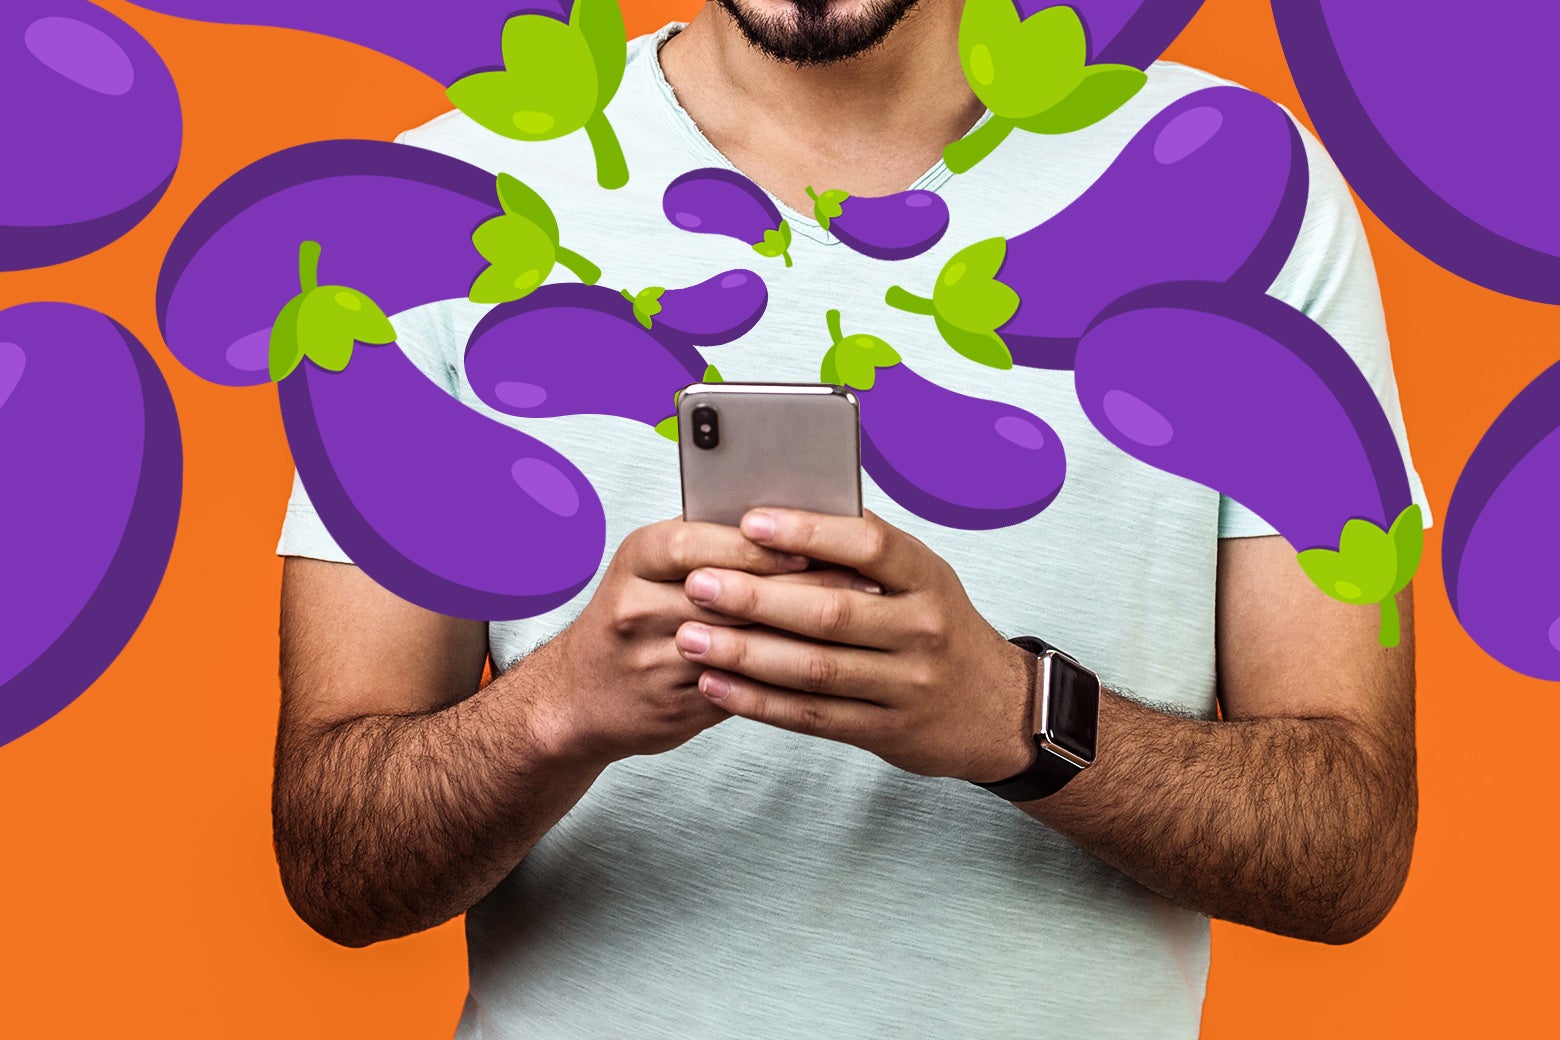 A man holding a smartphone with both hands is surrounded by eggplant emoji.